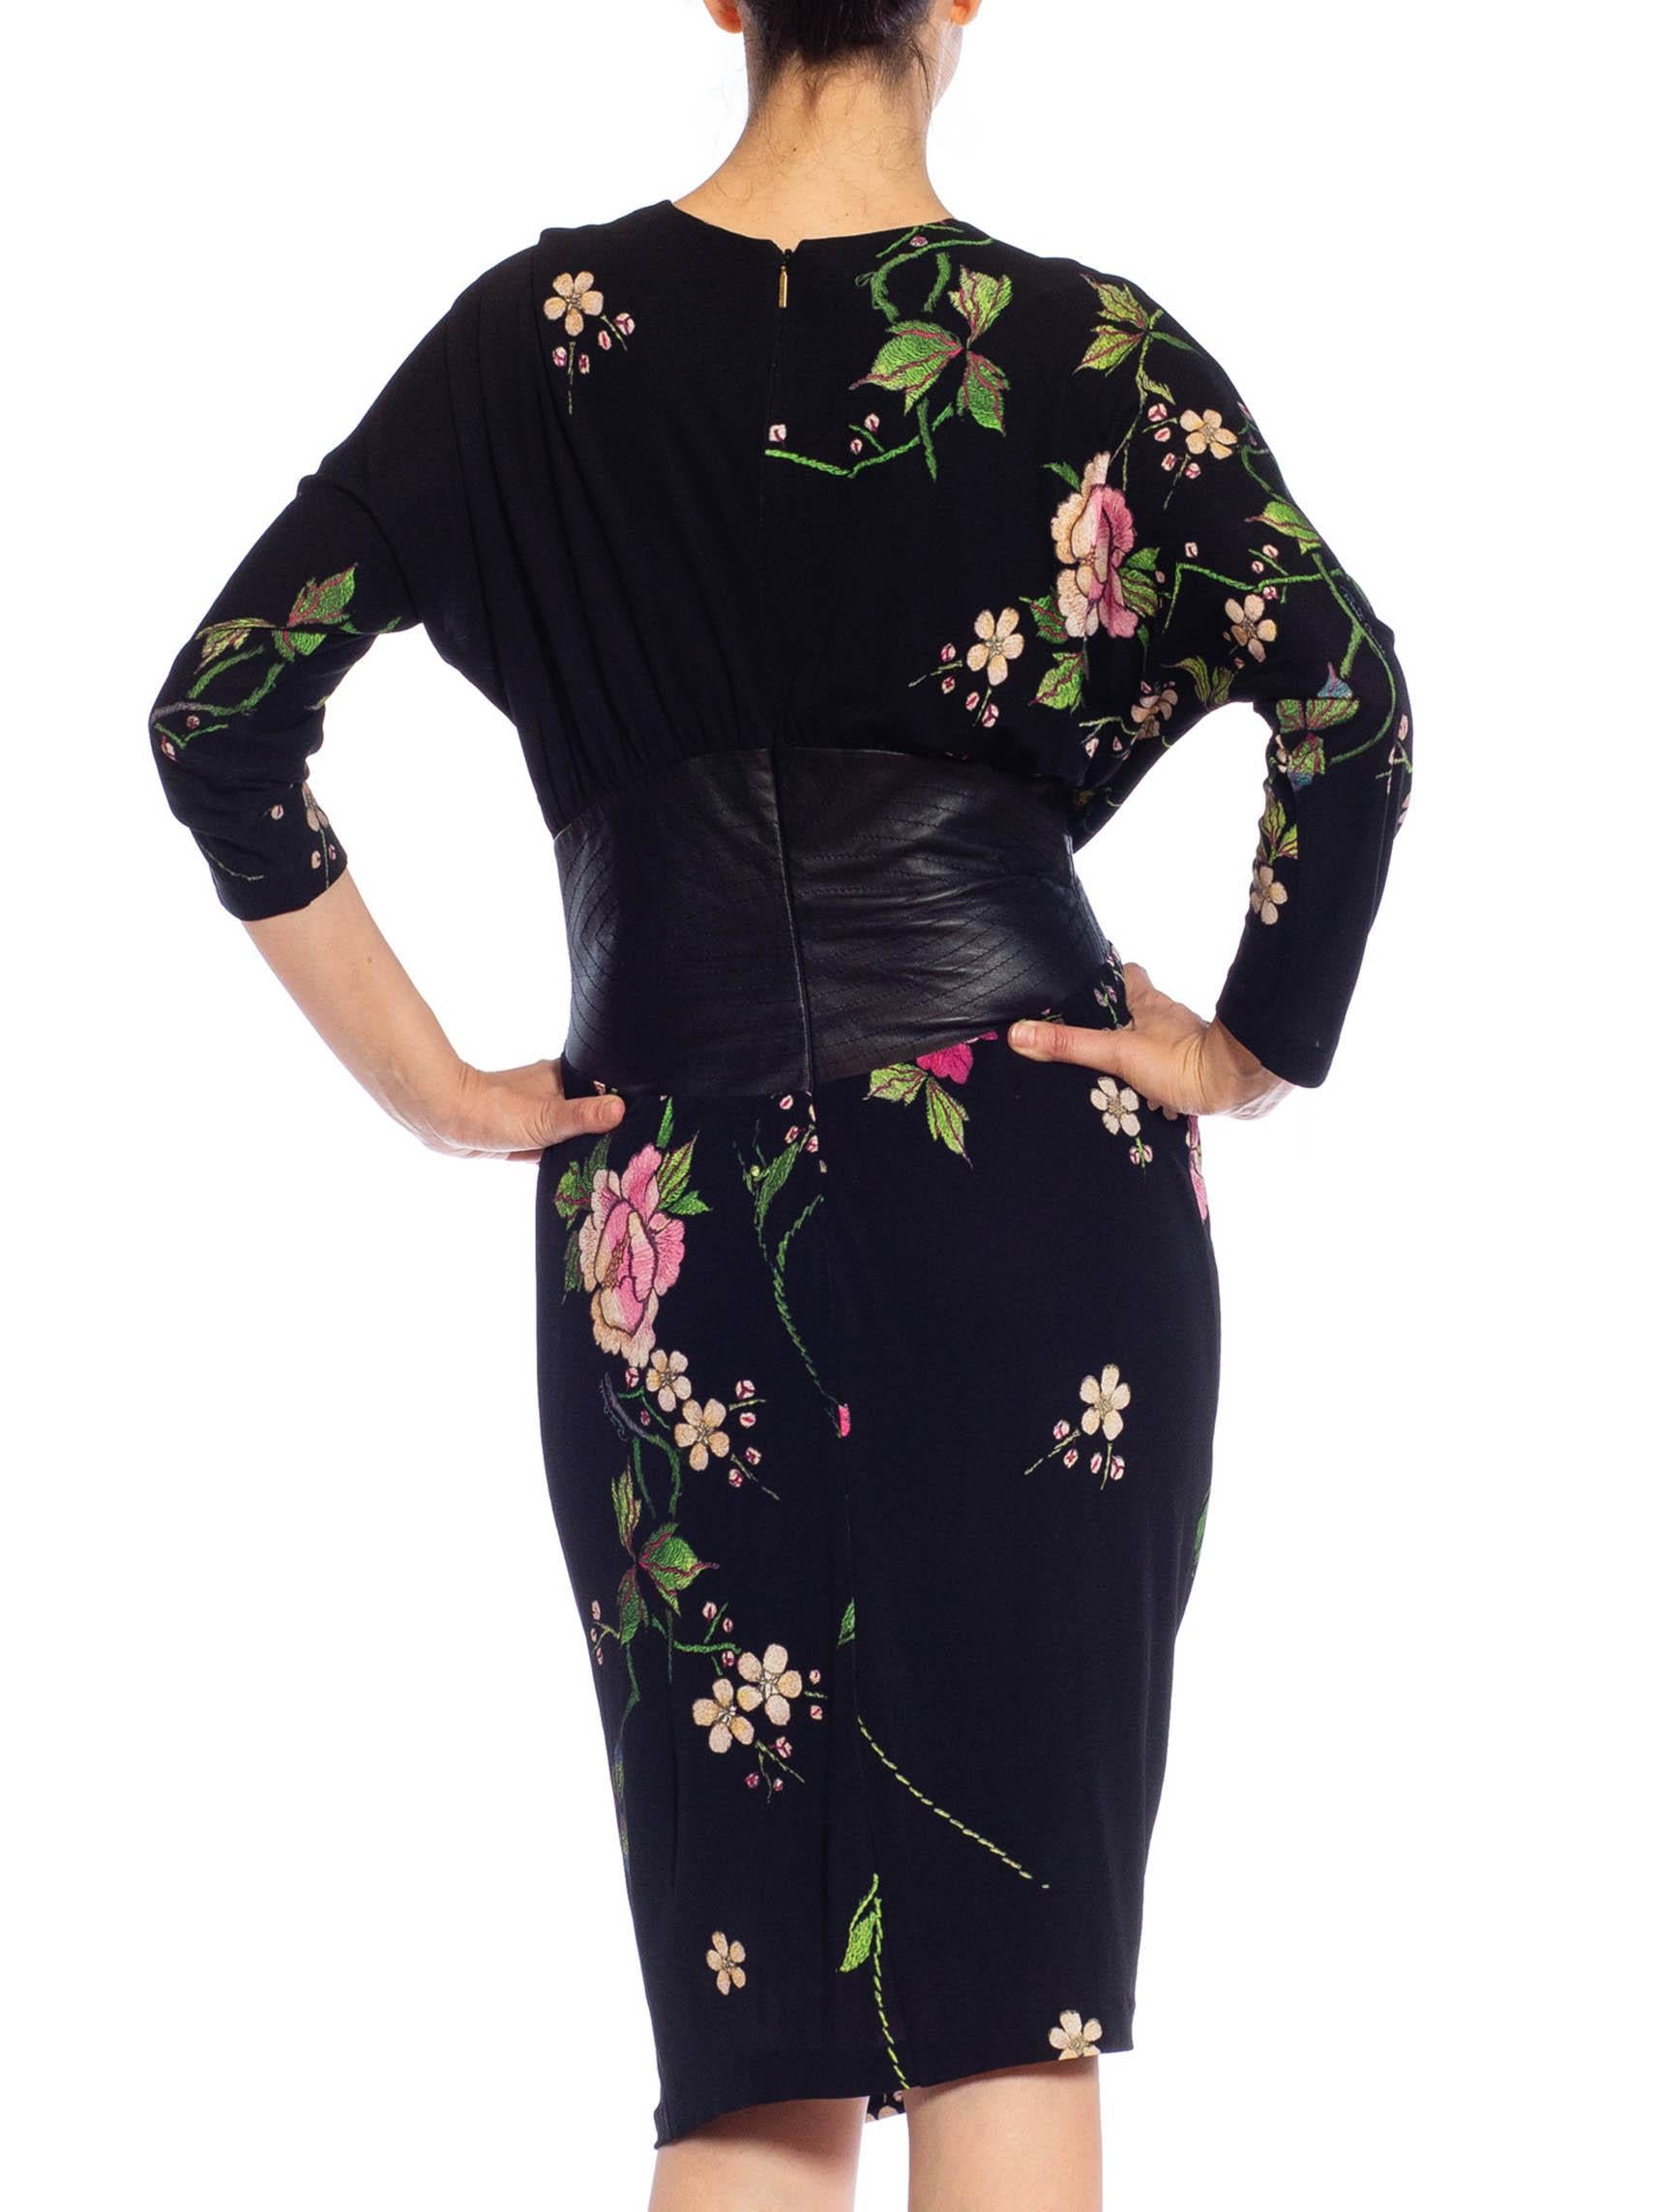 2000S ROBERTO CAVALLI Black Floral Rayon Jersey & Leather Dress For Sale 3